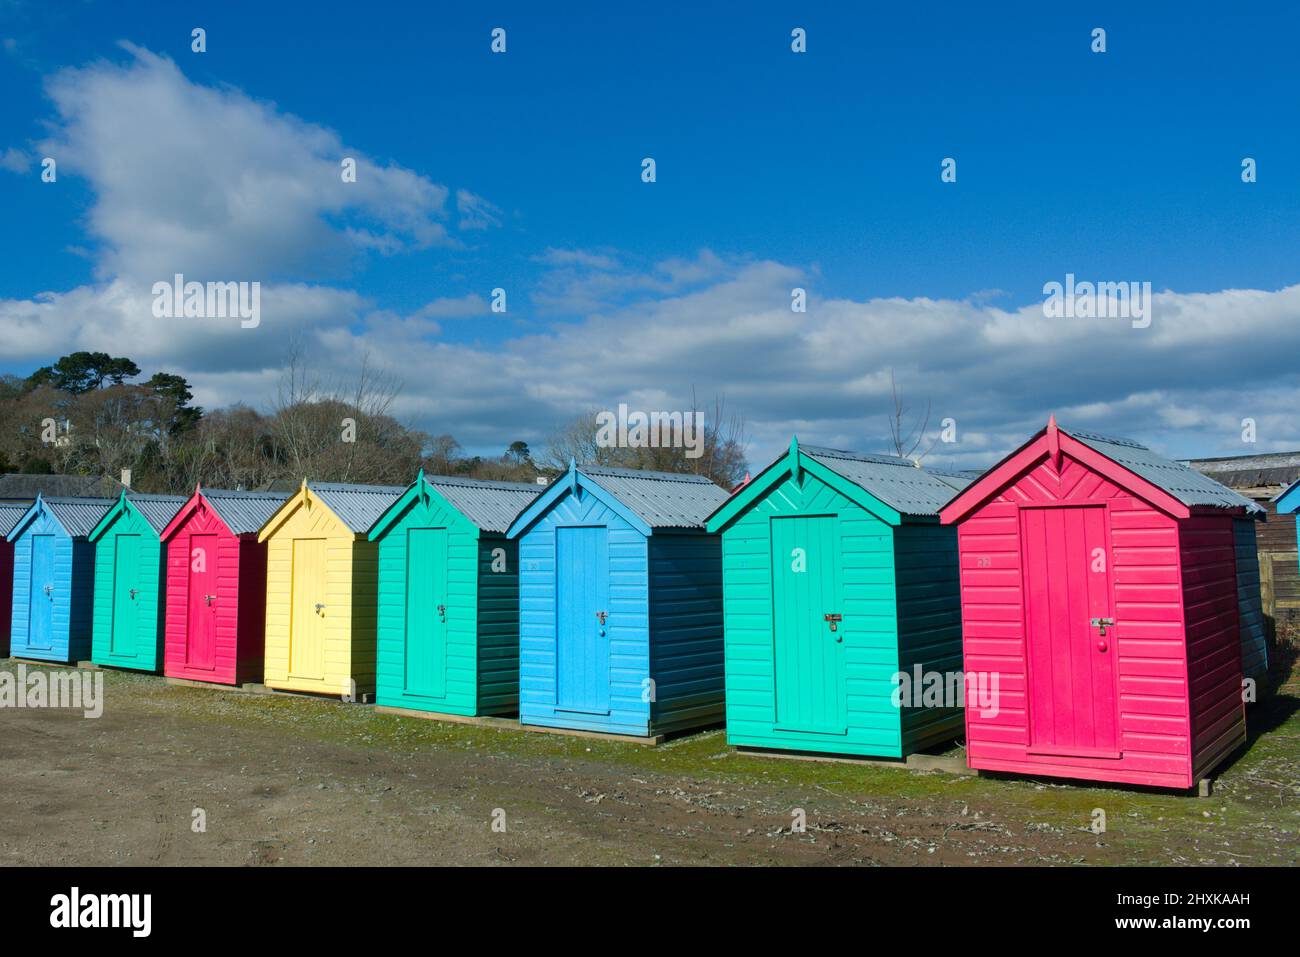 Iconic, traditional beach huts. Typical British seaside scene at Abersoch, north Wales on a sunny spring day. Stock Photo